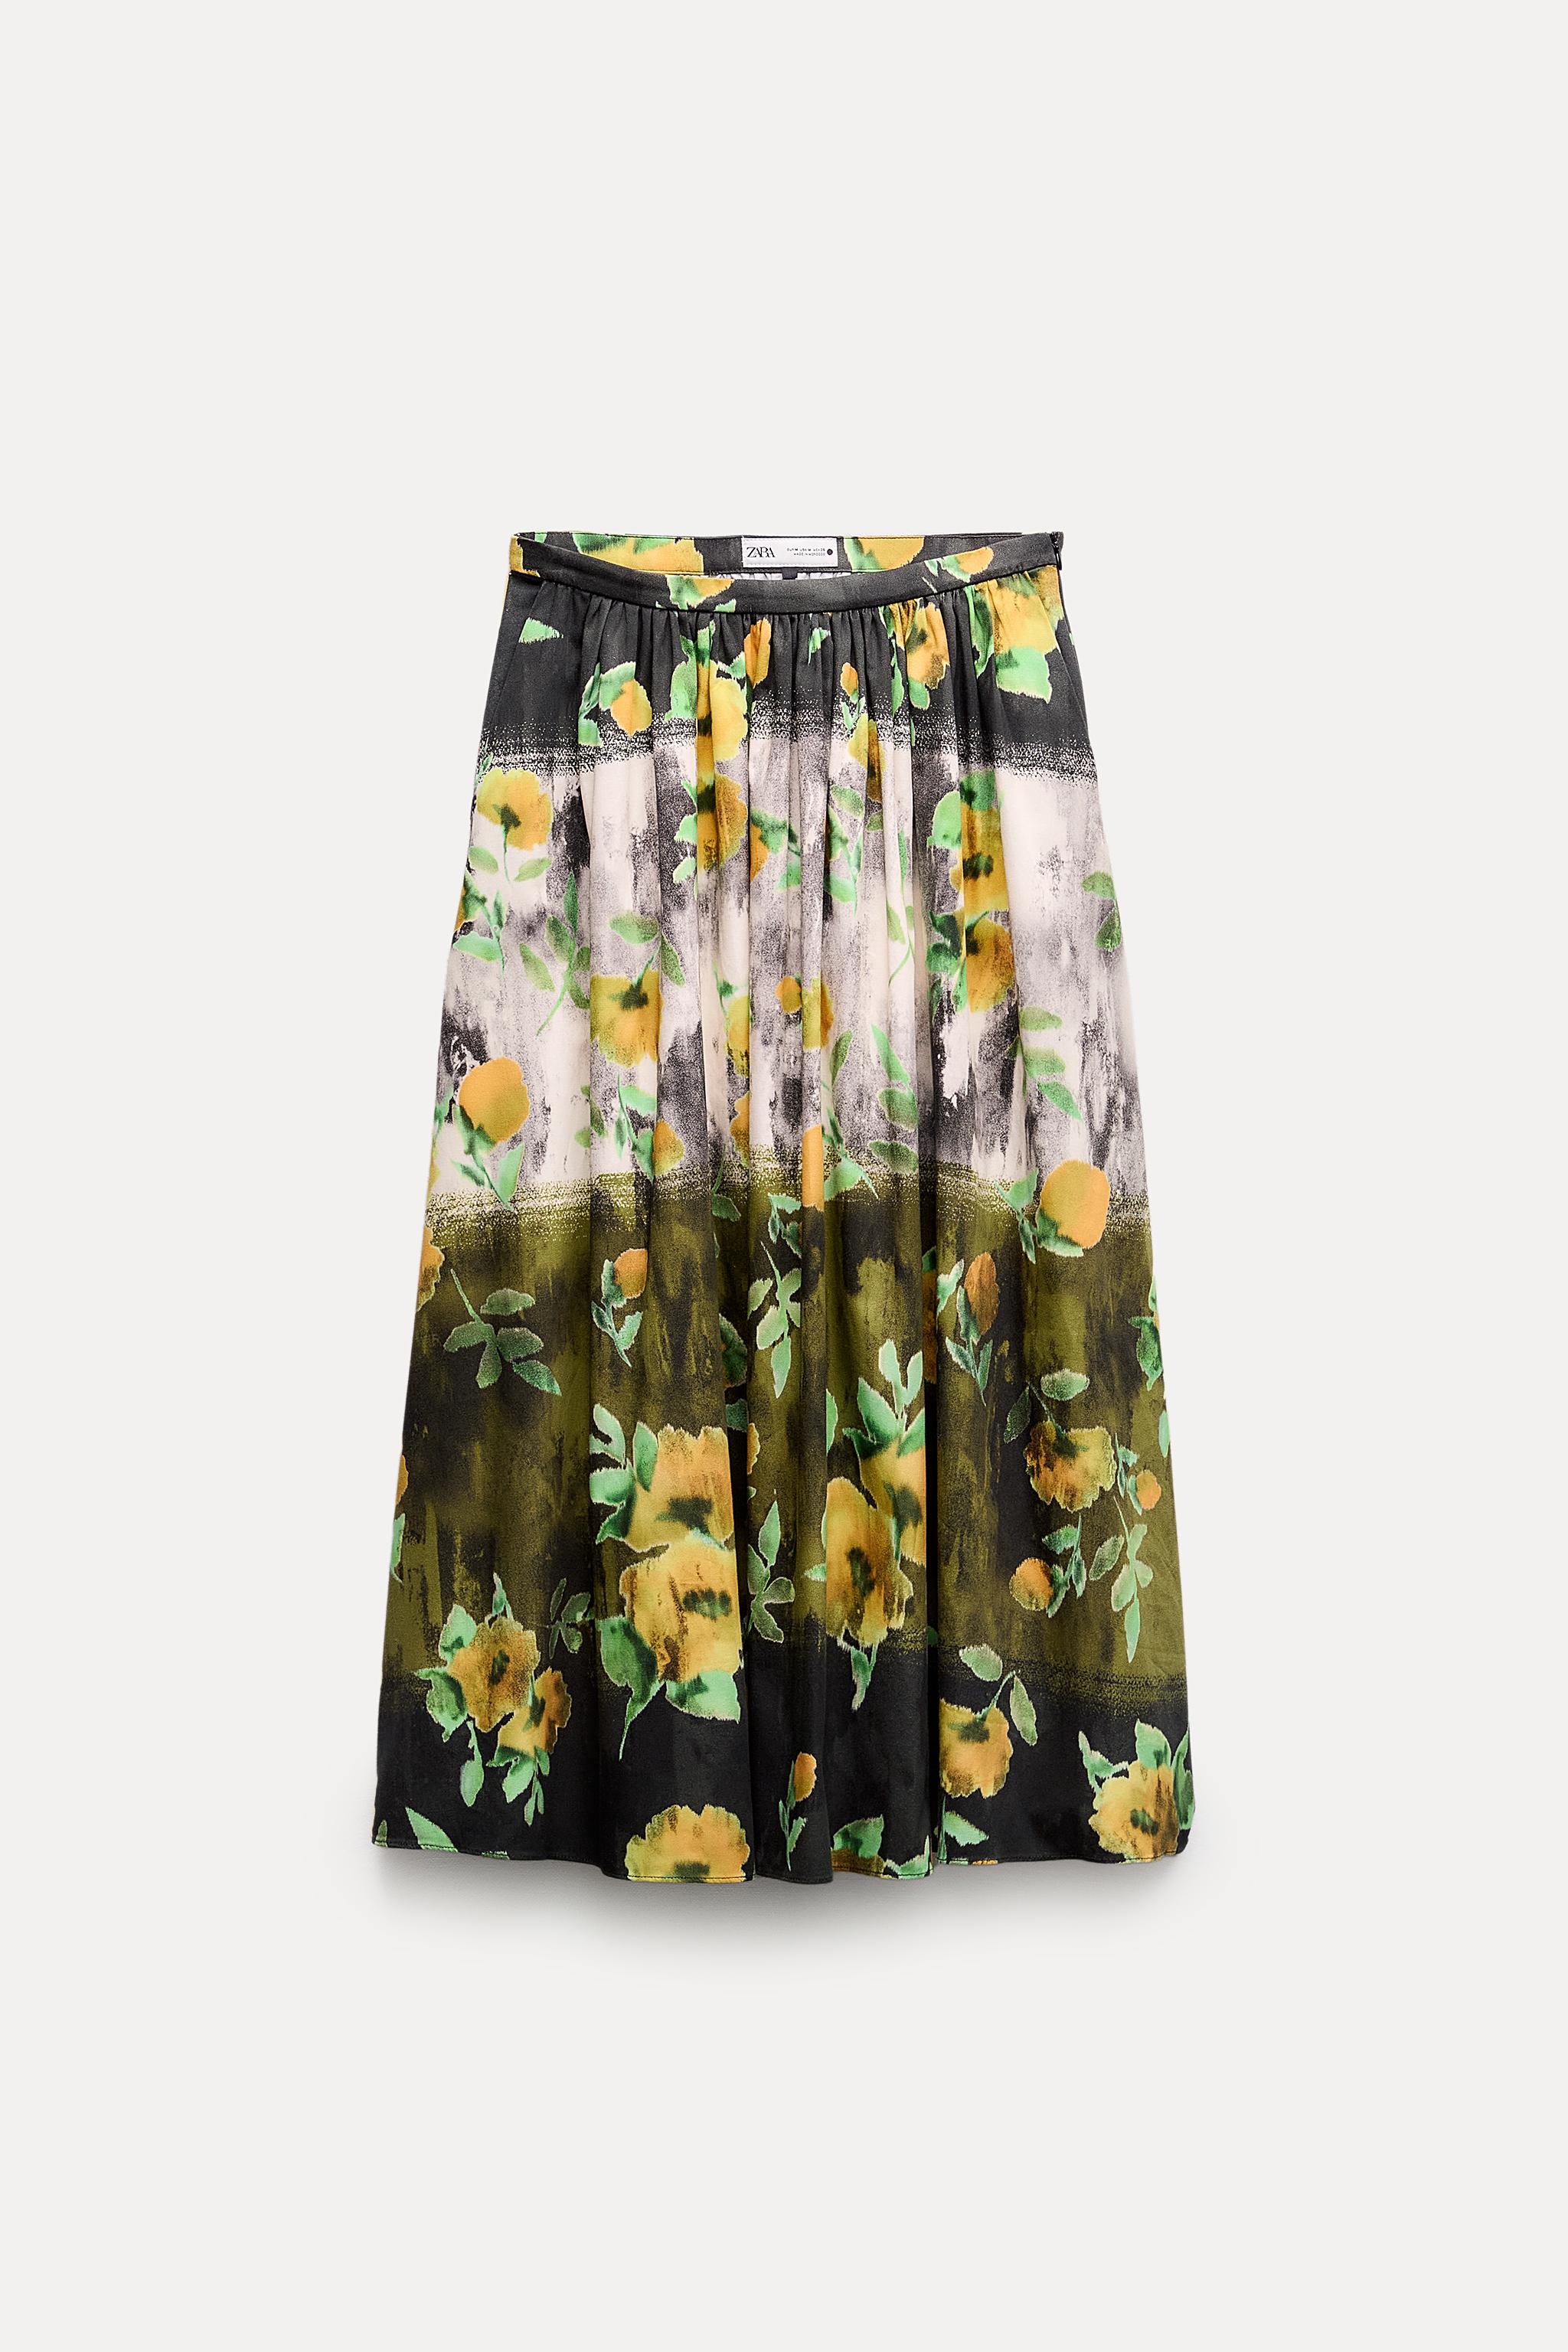 FLORAL PRINT SKIRT ZW COLLECTION - Multicolored | ZARA Canada